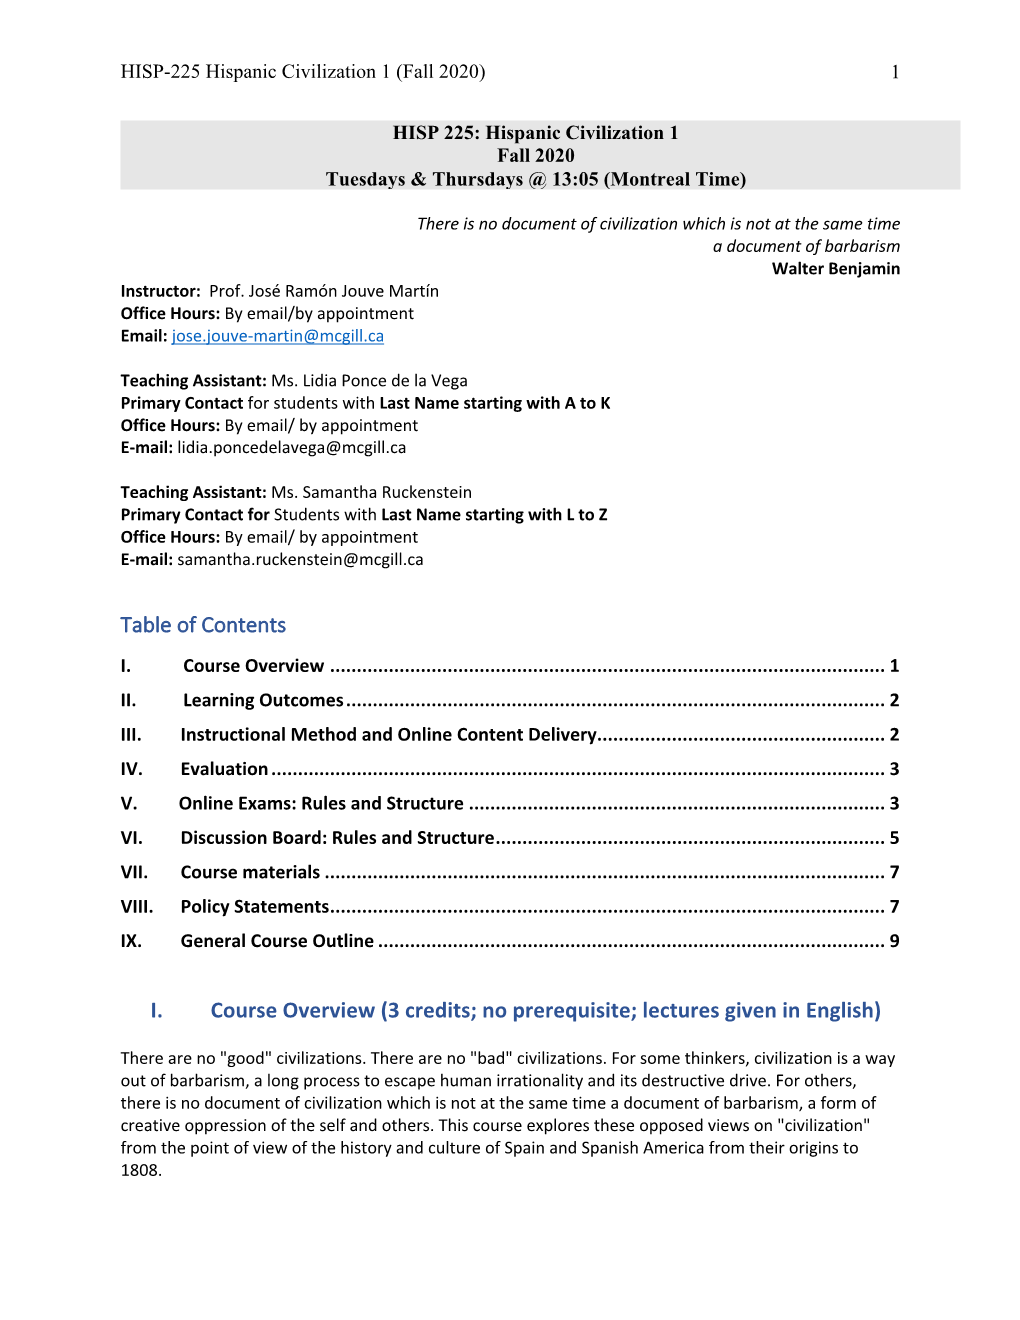 Table of Contents I. Course Overview (3 Credits; No Prerequisite; Lectures